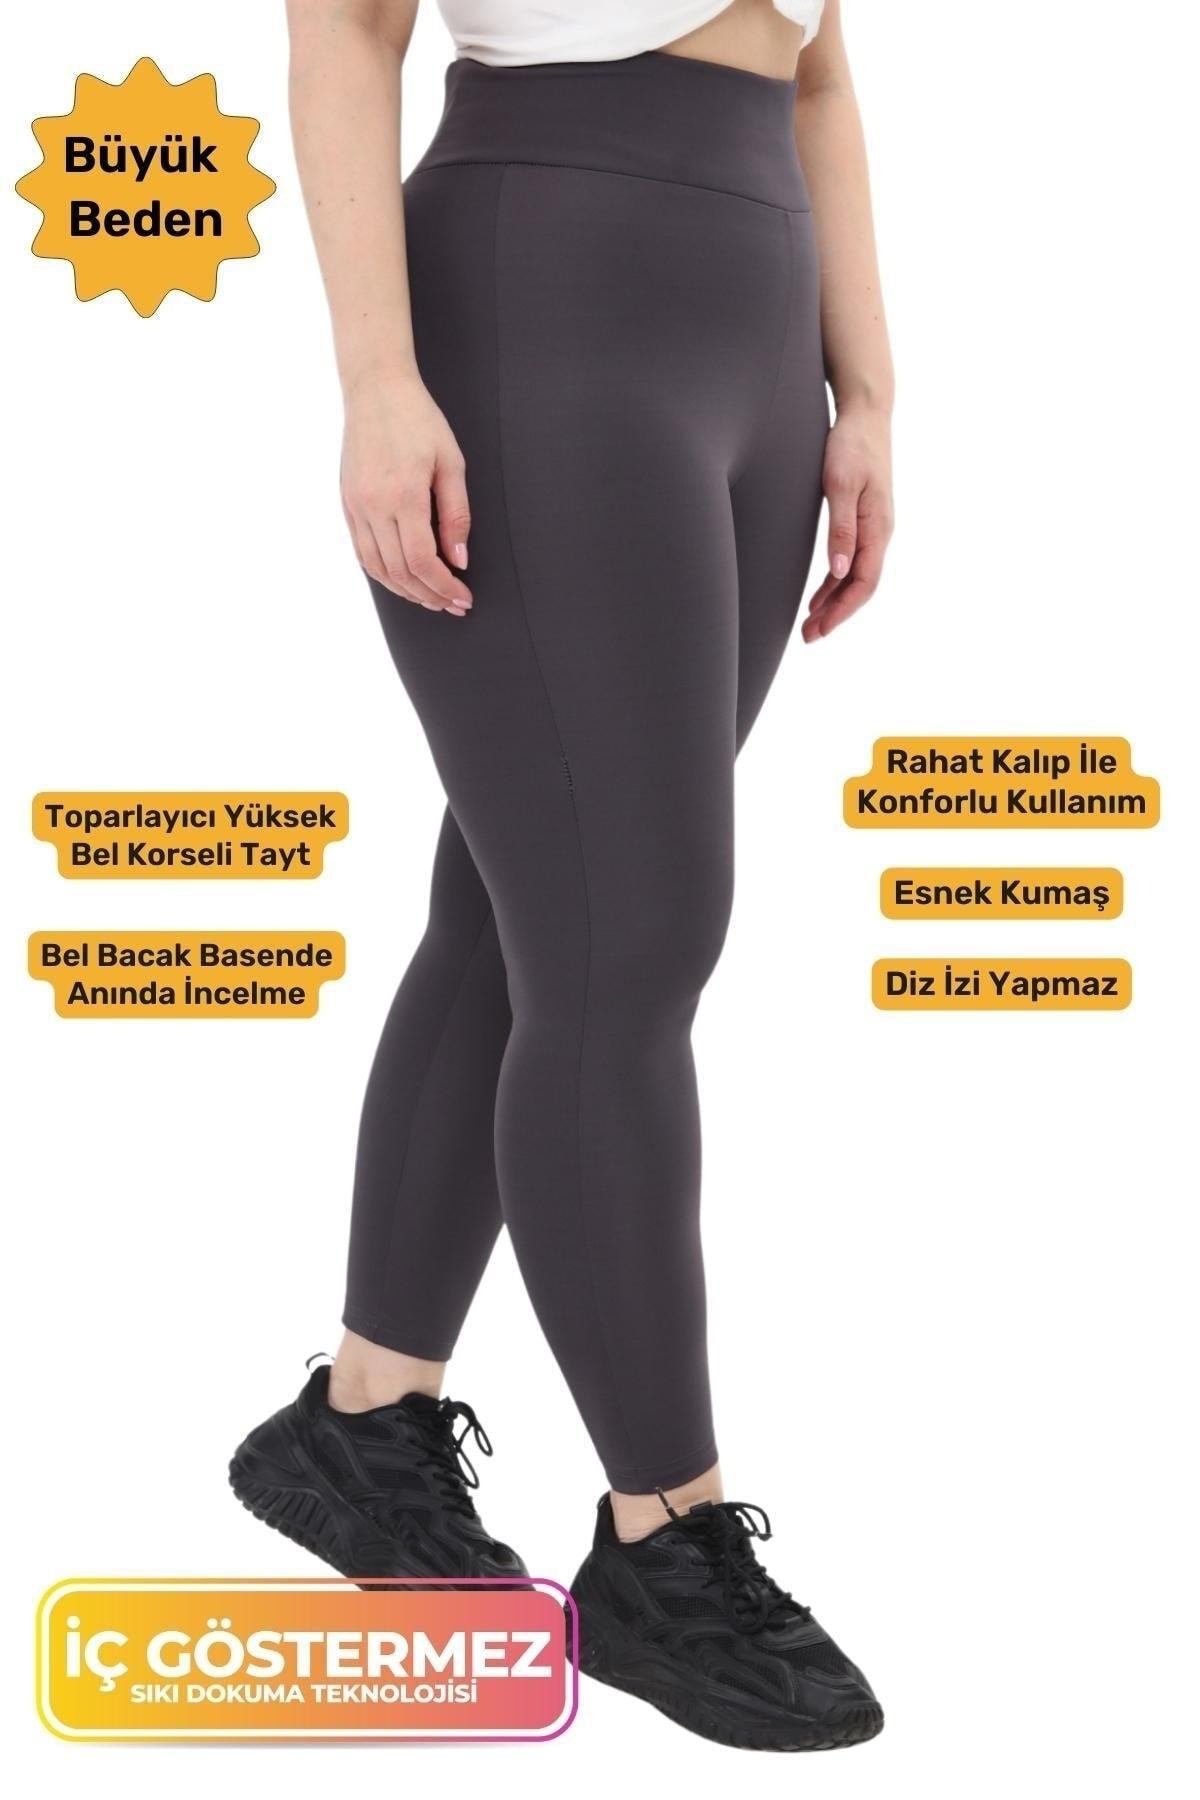 Plus Size Comfort Model High Waisted Sports & Daily Leggings with Contouring Slimming Corset - Swordslife